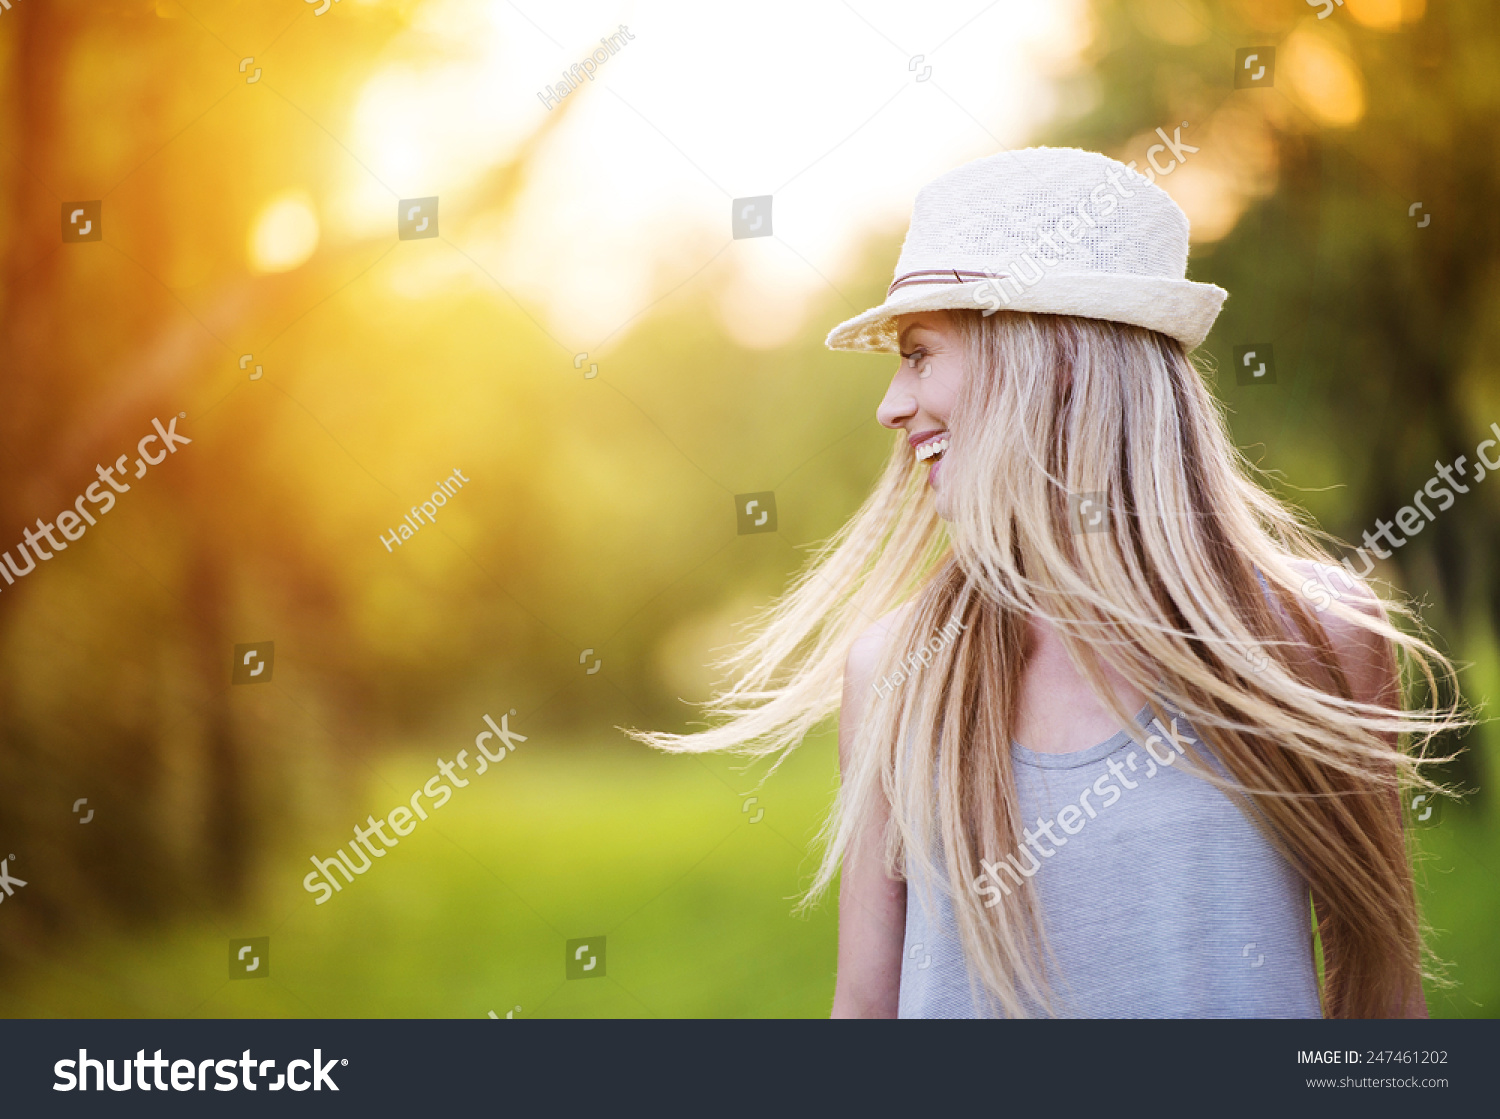 stock-photo-attractive-young-woman-enjoying-her-time-outside-in-park-with-sunset-in-background-247461202.jpg